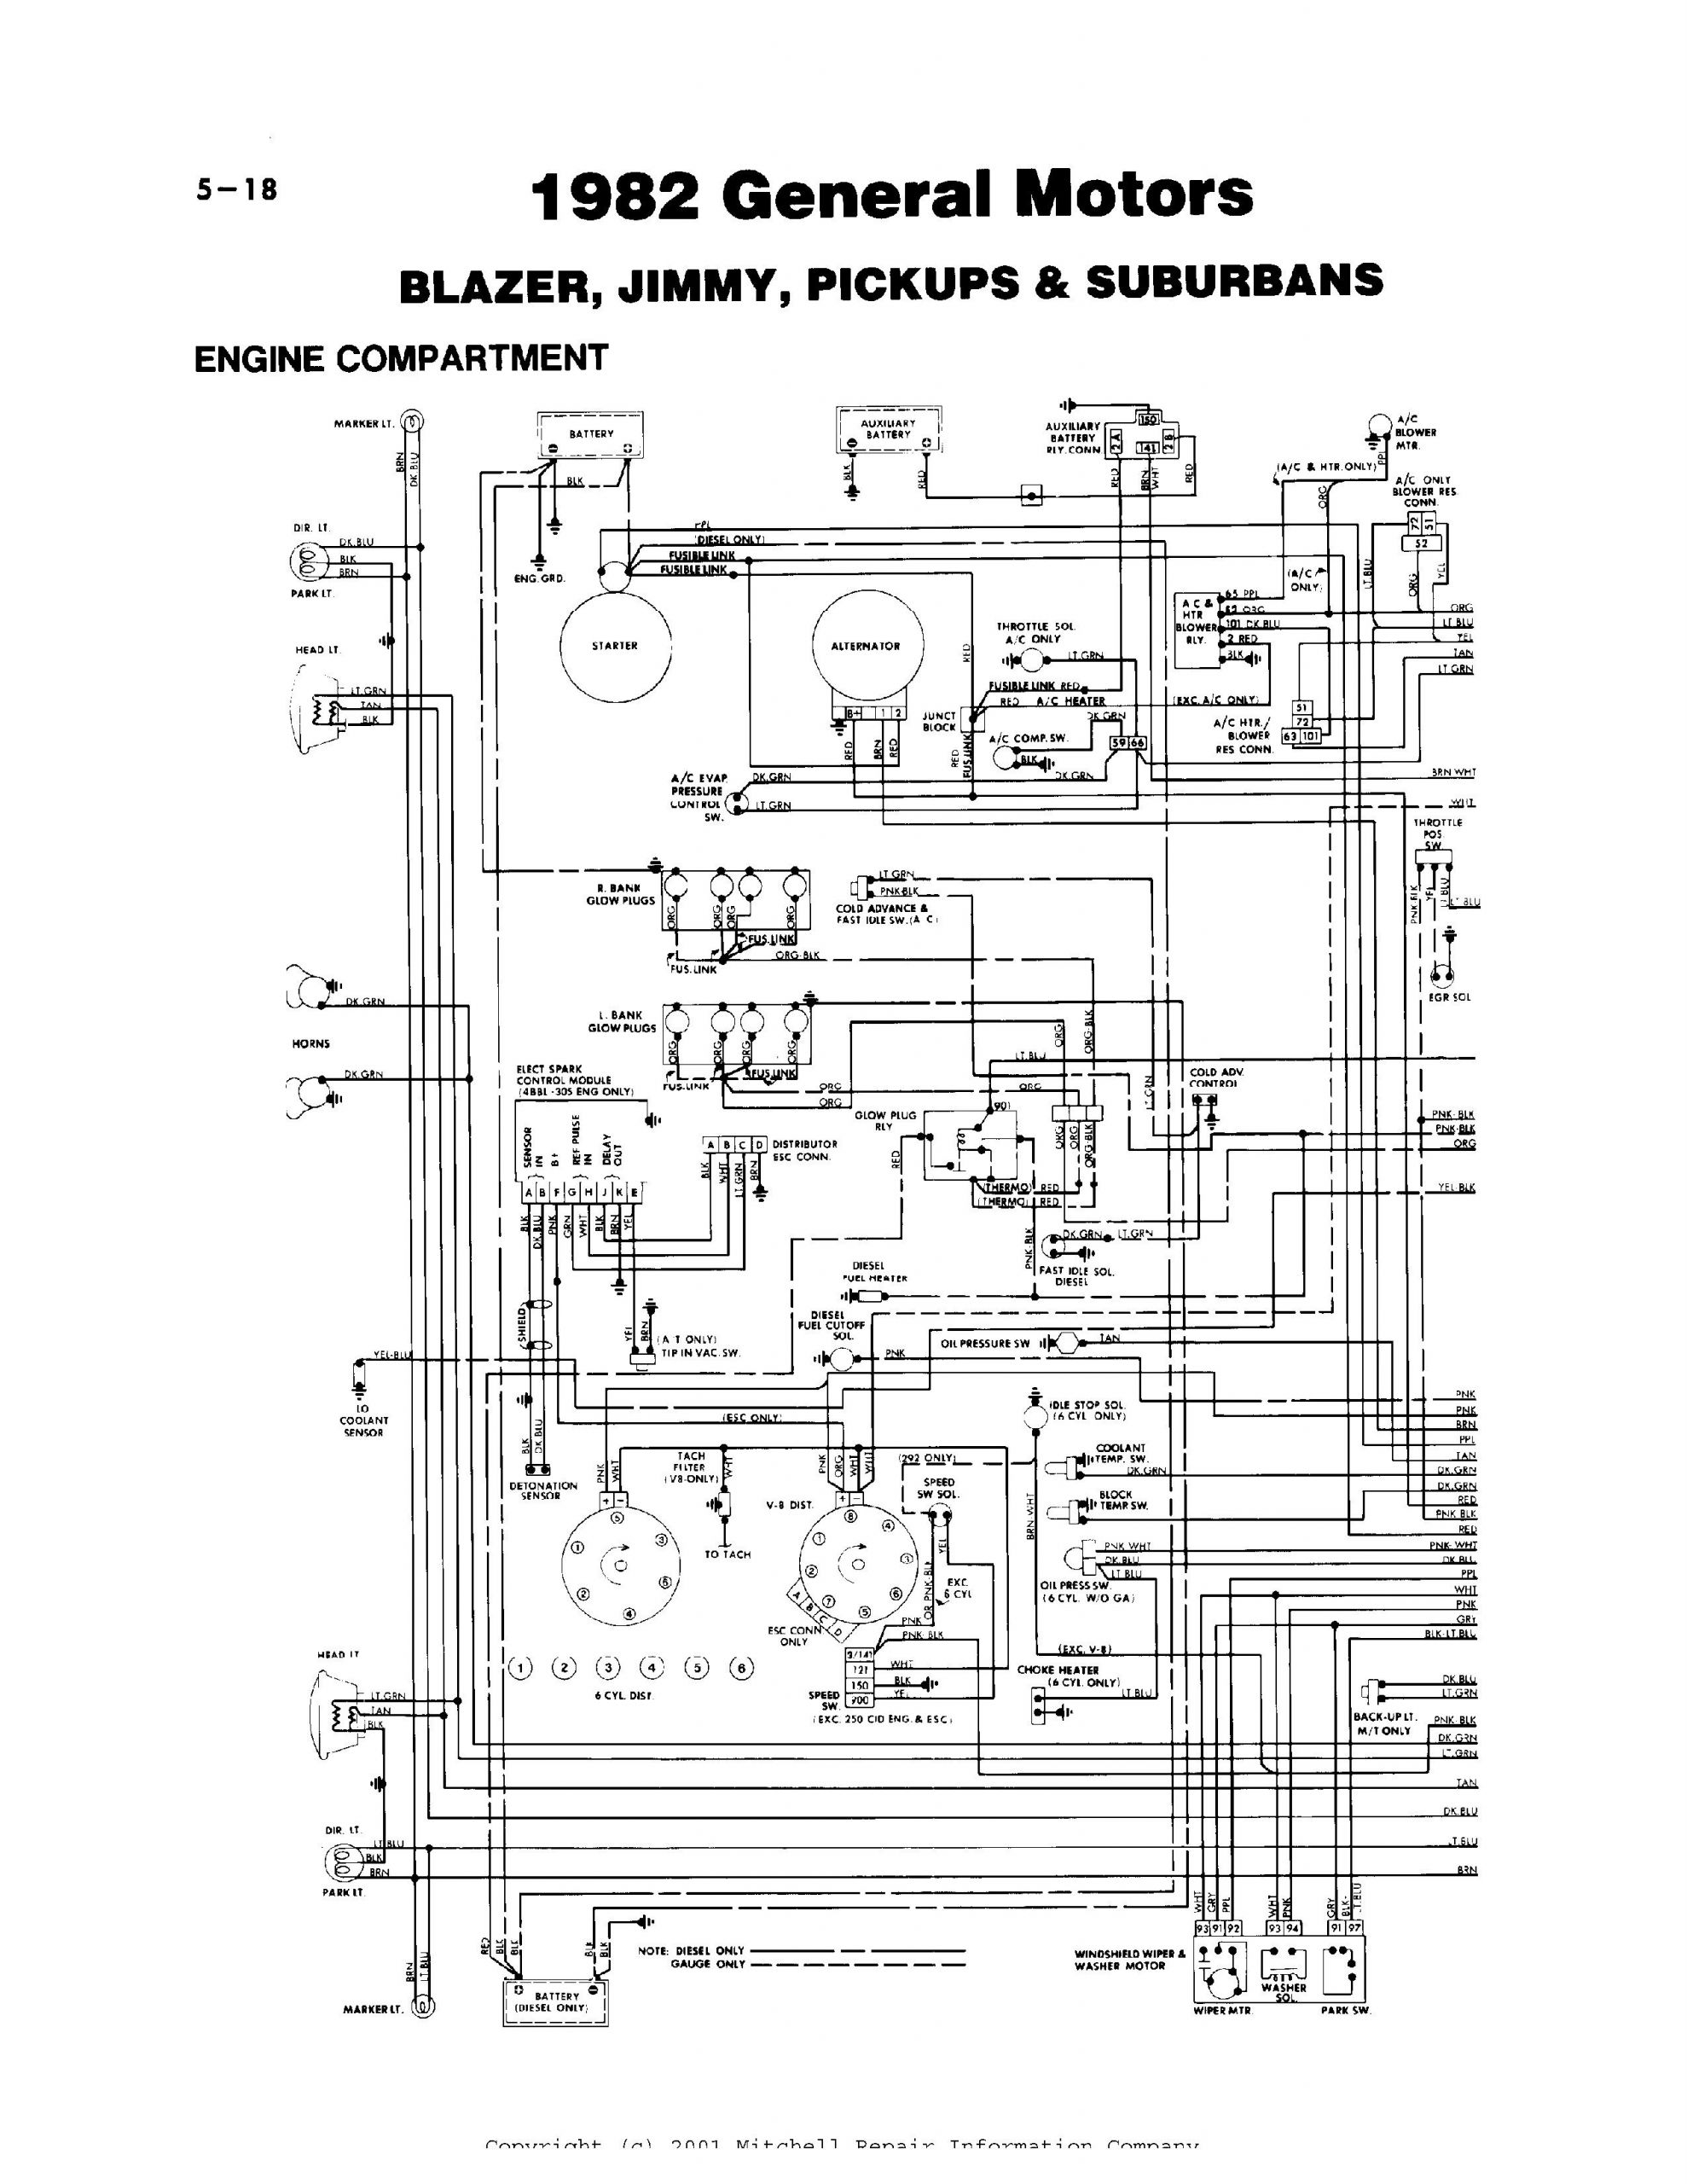 Wiring Diagram On A 1982 Shevy Truck Radeo Need Wiring Schematic for A 305 Chevy Truck 1982 Of Wiring Diagram On A 1982 Shevy Truck Radeo